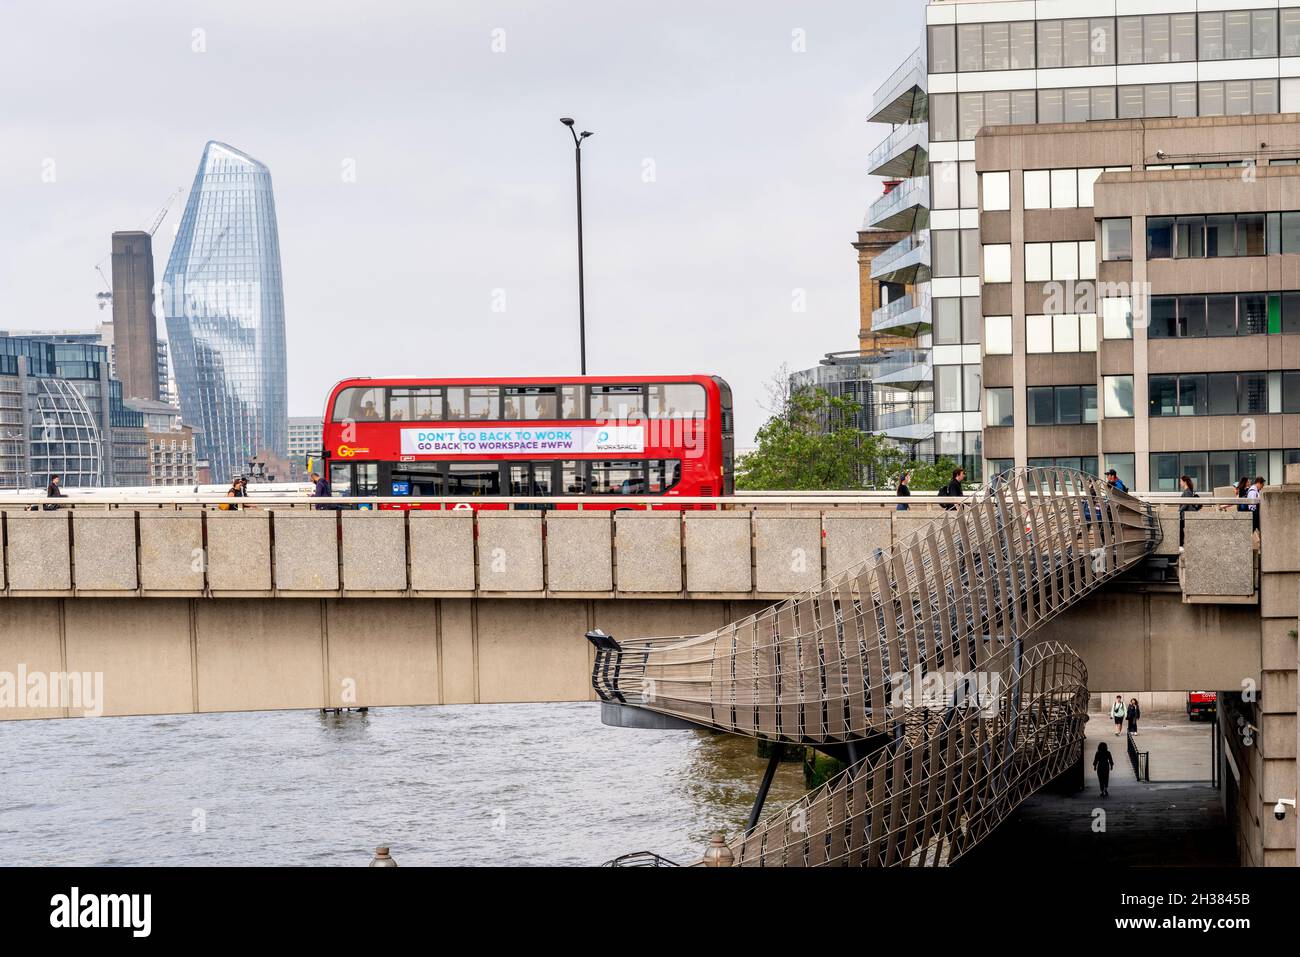 A Traditional Red London Bus Crosses Over London Bridge With The New London Bridge Staircase In The Foreground, London, UK. Stock Photo